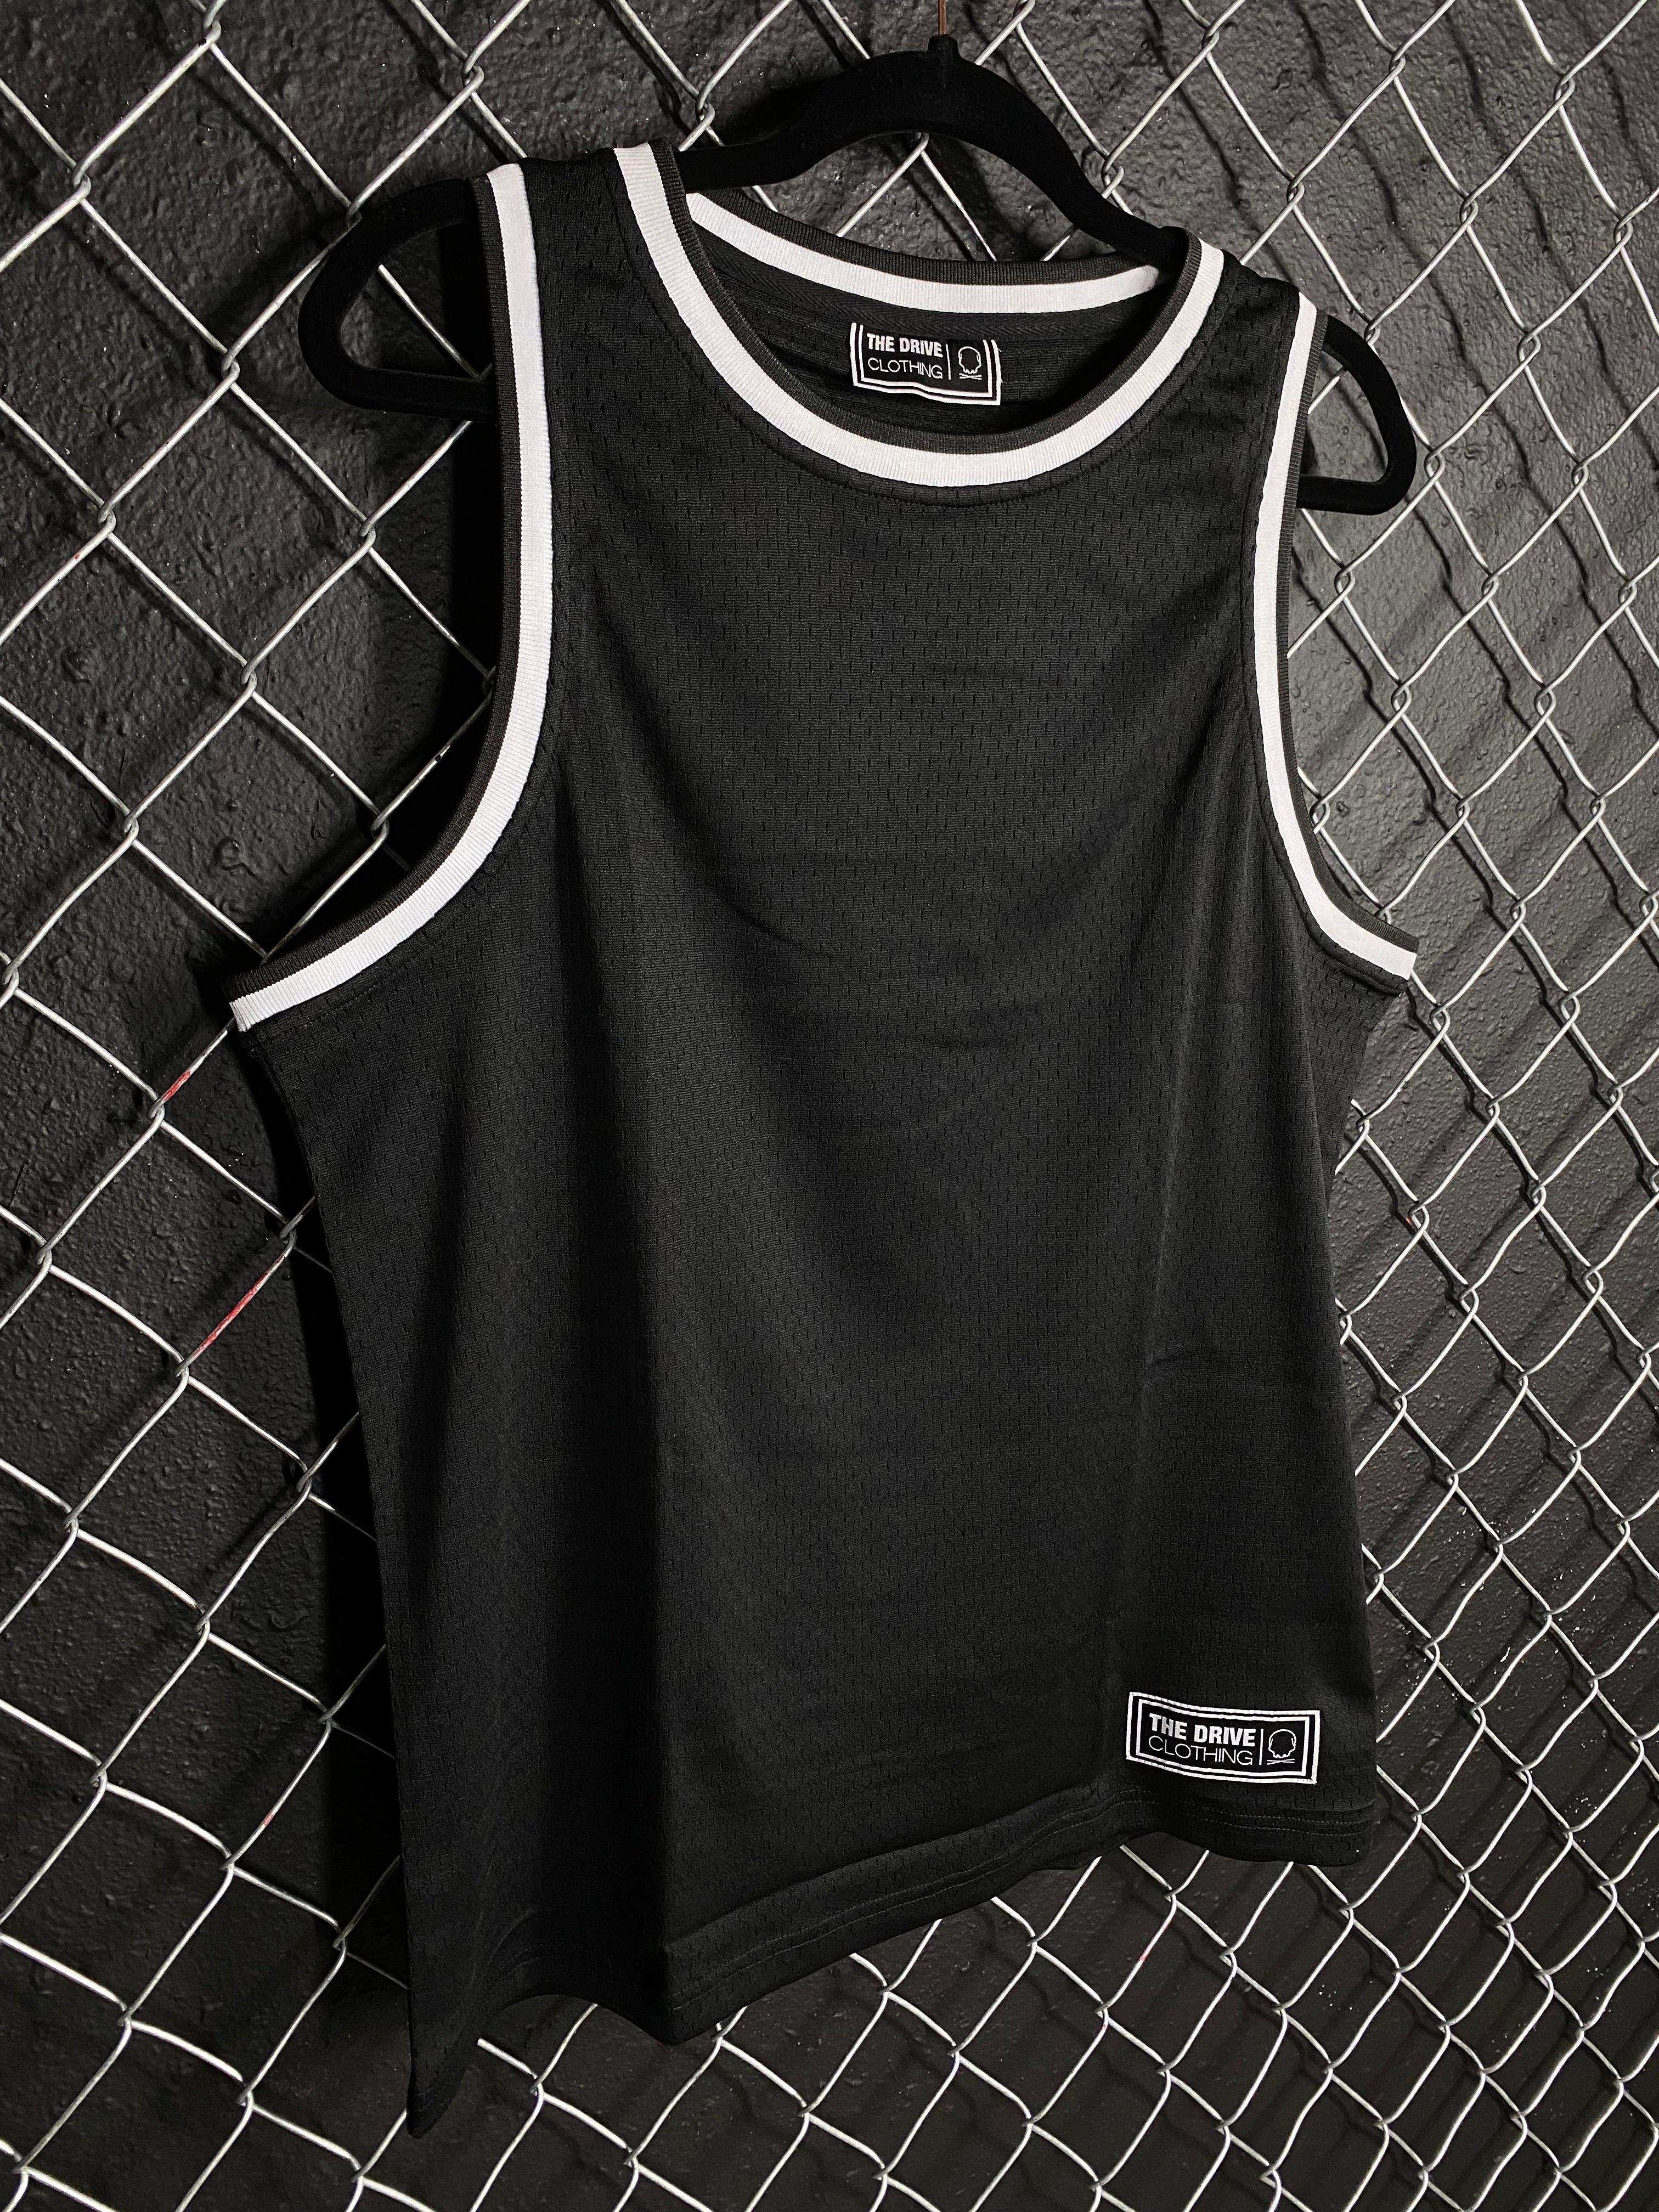 TDC JERSEY - The Drive Clothing